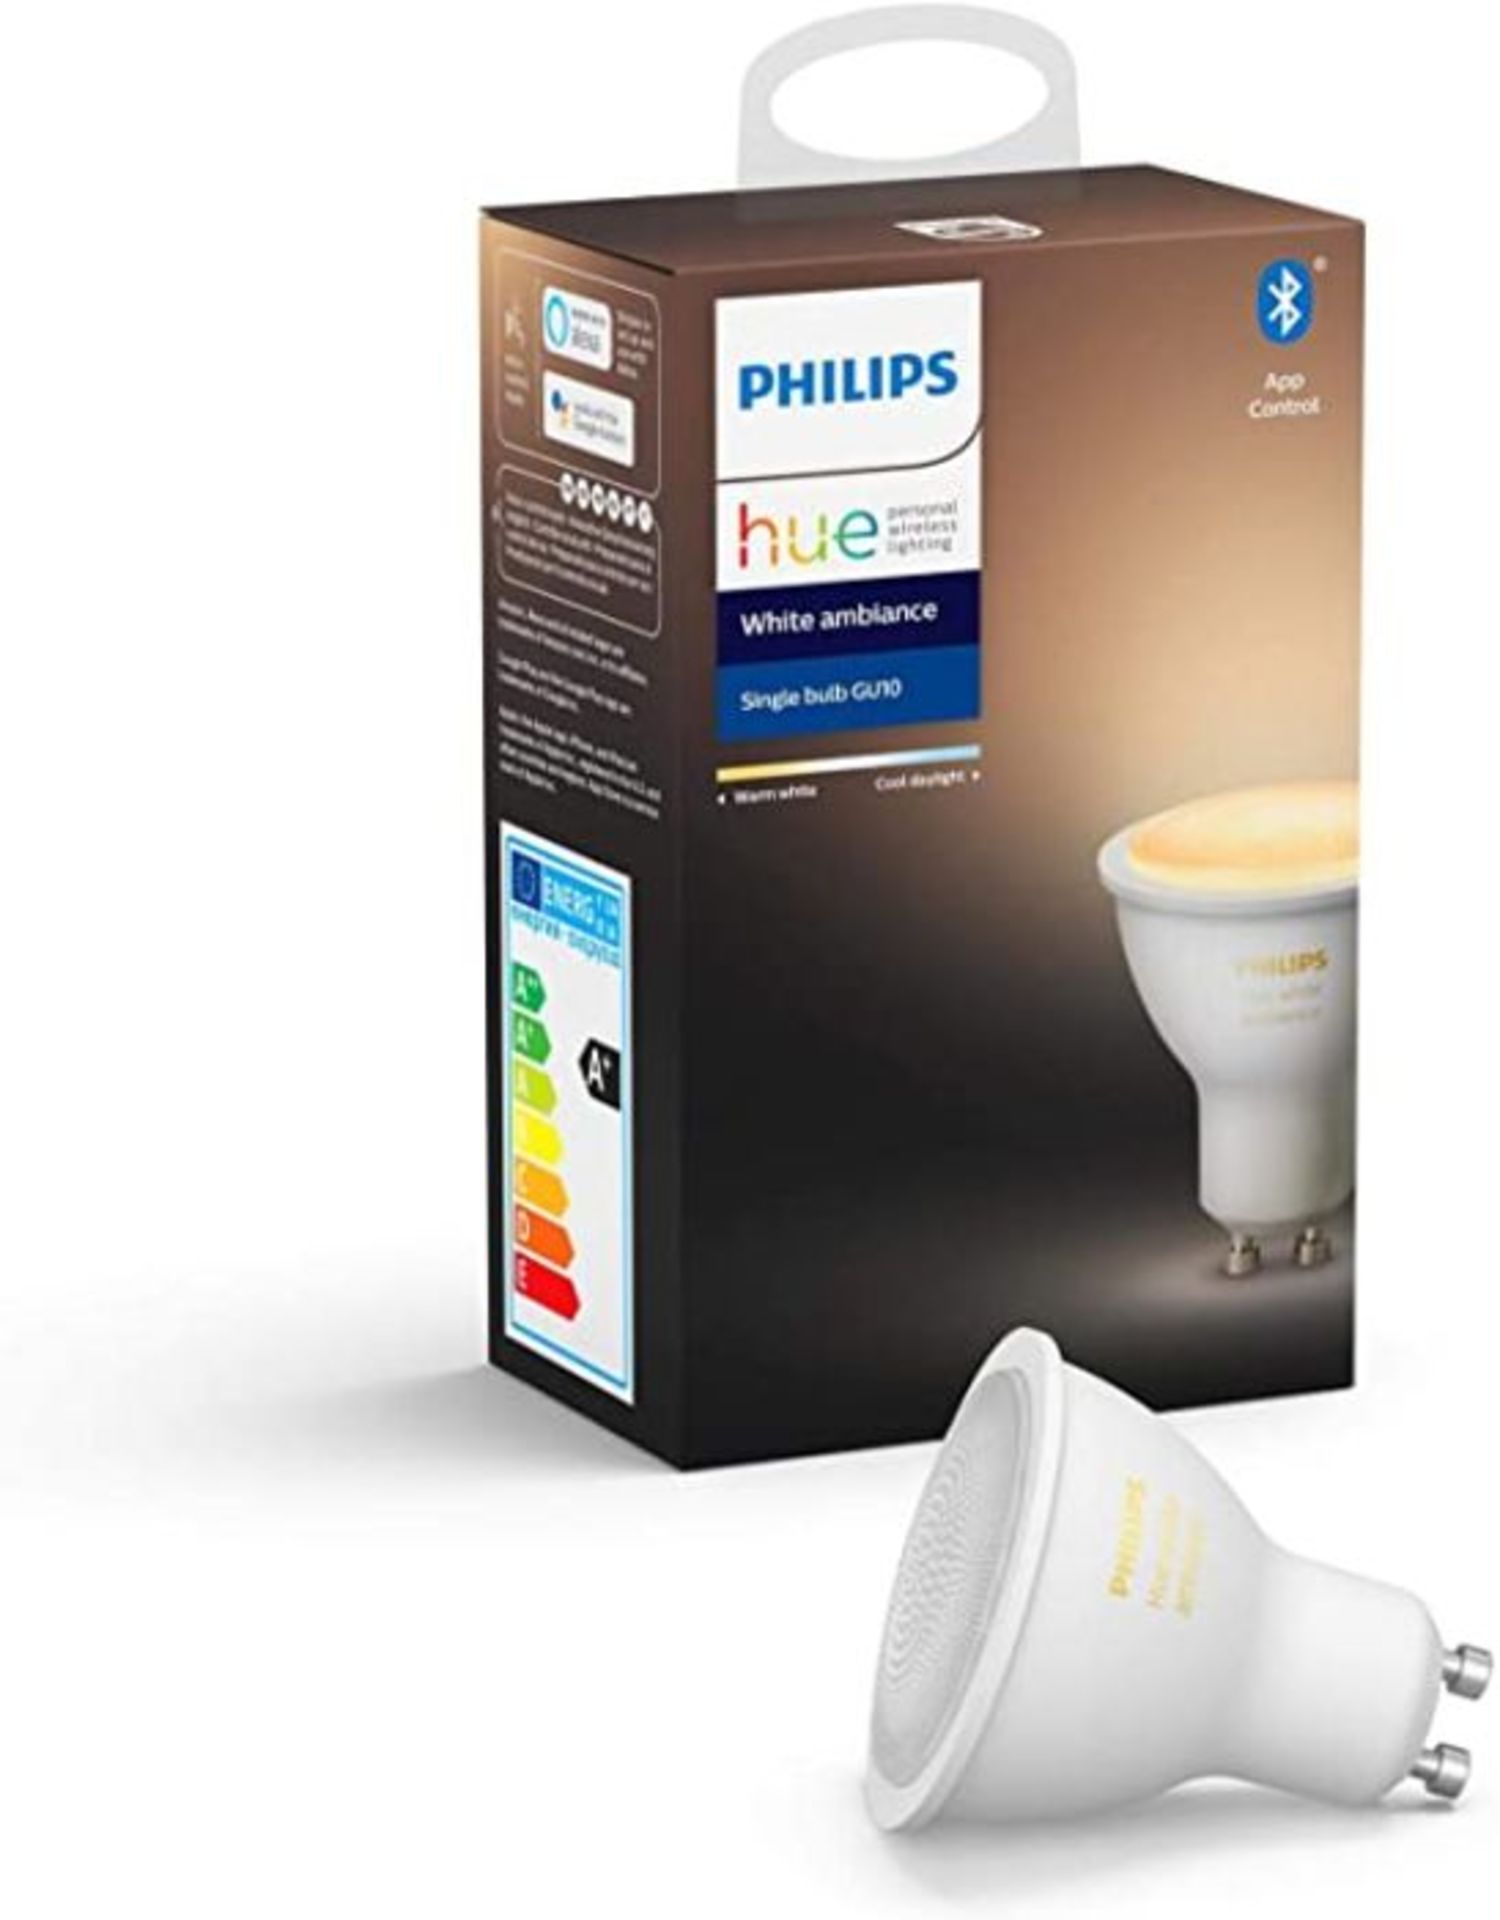 Philips Hue White Ambiance Single Smart Spotlight LED [GU10 Spot] with Bluetooth. Works with Alexa - Image 2 of 2